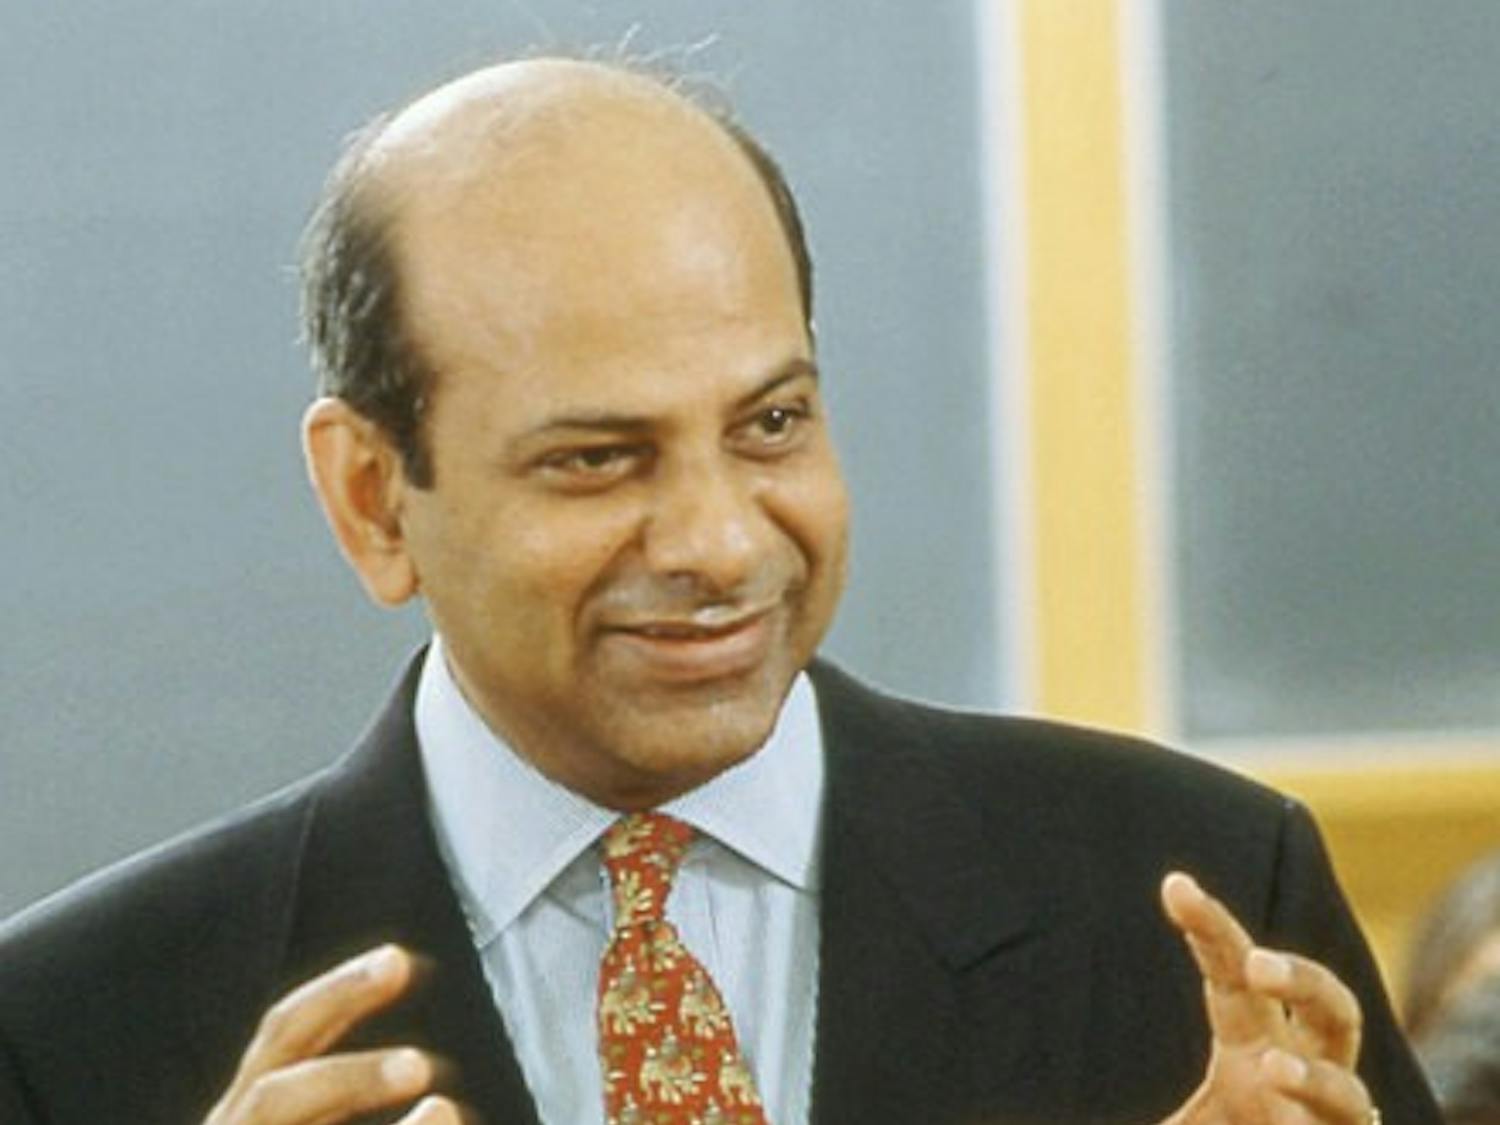 Professor Vijay Govindarajan, seen here, was one of the two Tuck School of Business professors named to The Times' 2007 Thinkers 50 list.